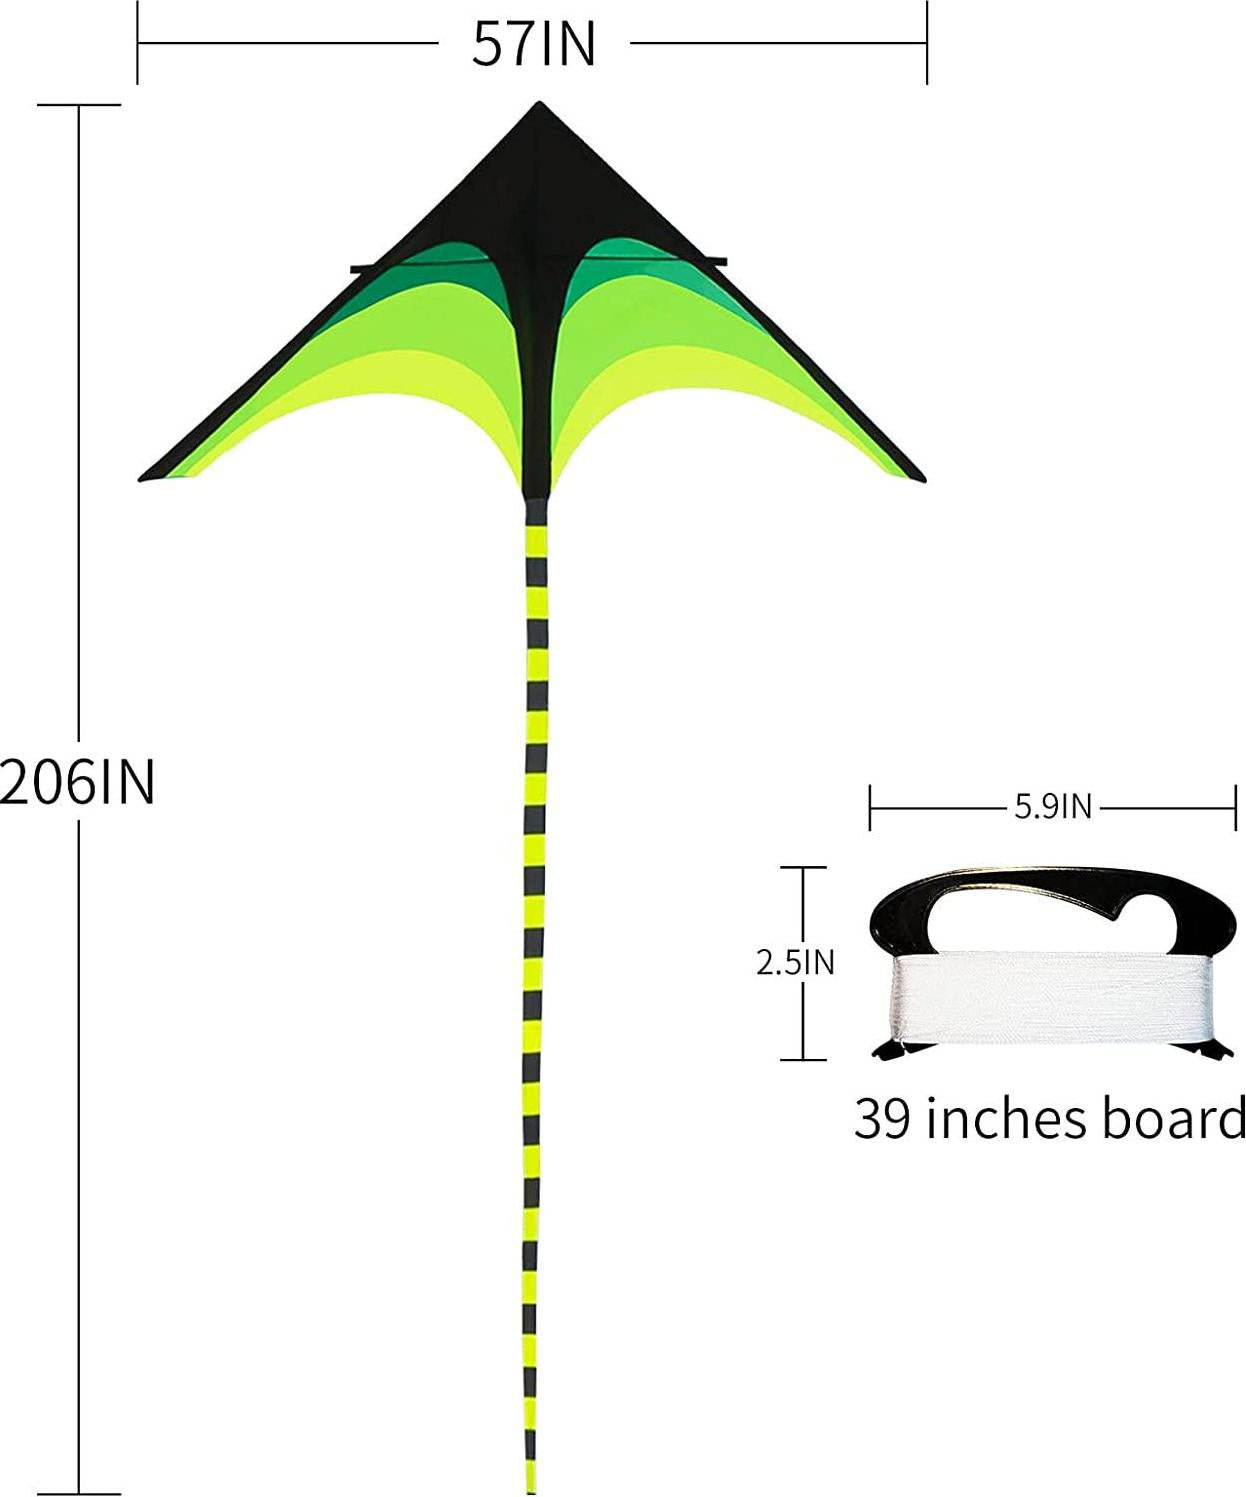 Lamonty, Lamonty Green Kite - Beautiful andÂ Easy Flyer Kite for Children and Adult with Long Colorful Tail String Line Accessories Easy to Soar High Outdoor Sports Game Activities or Beach Trip